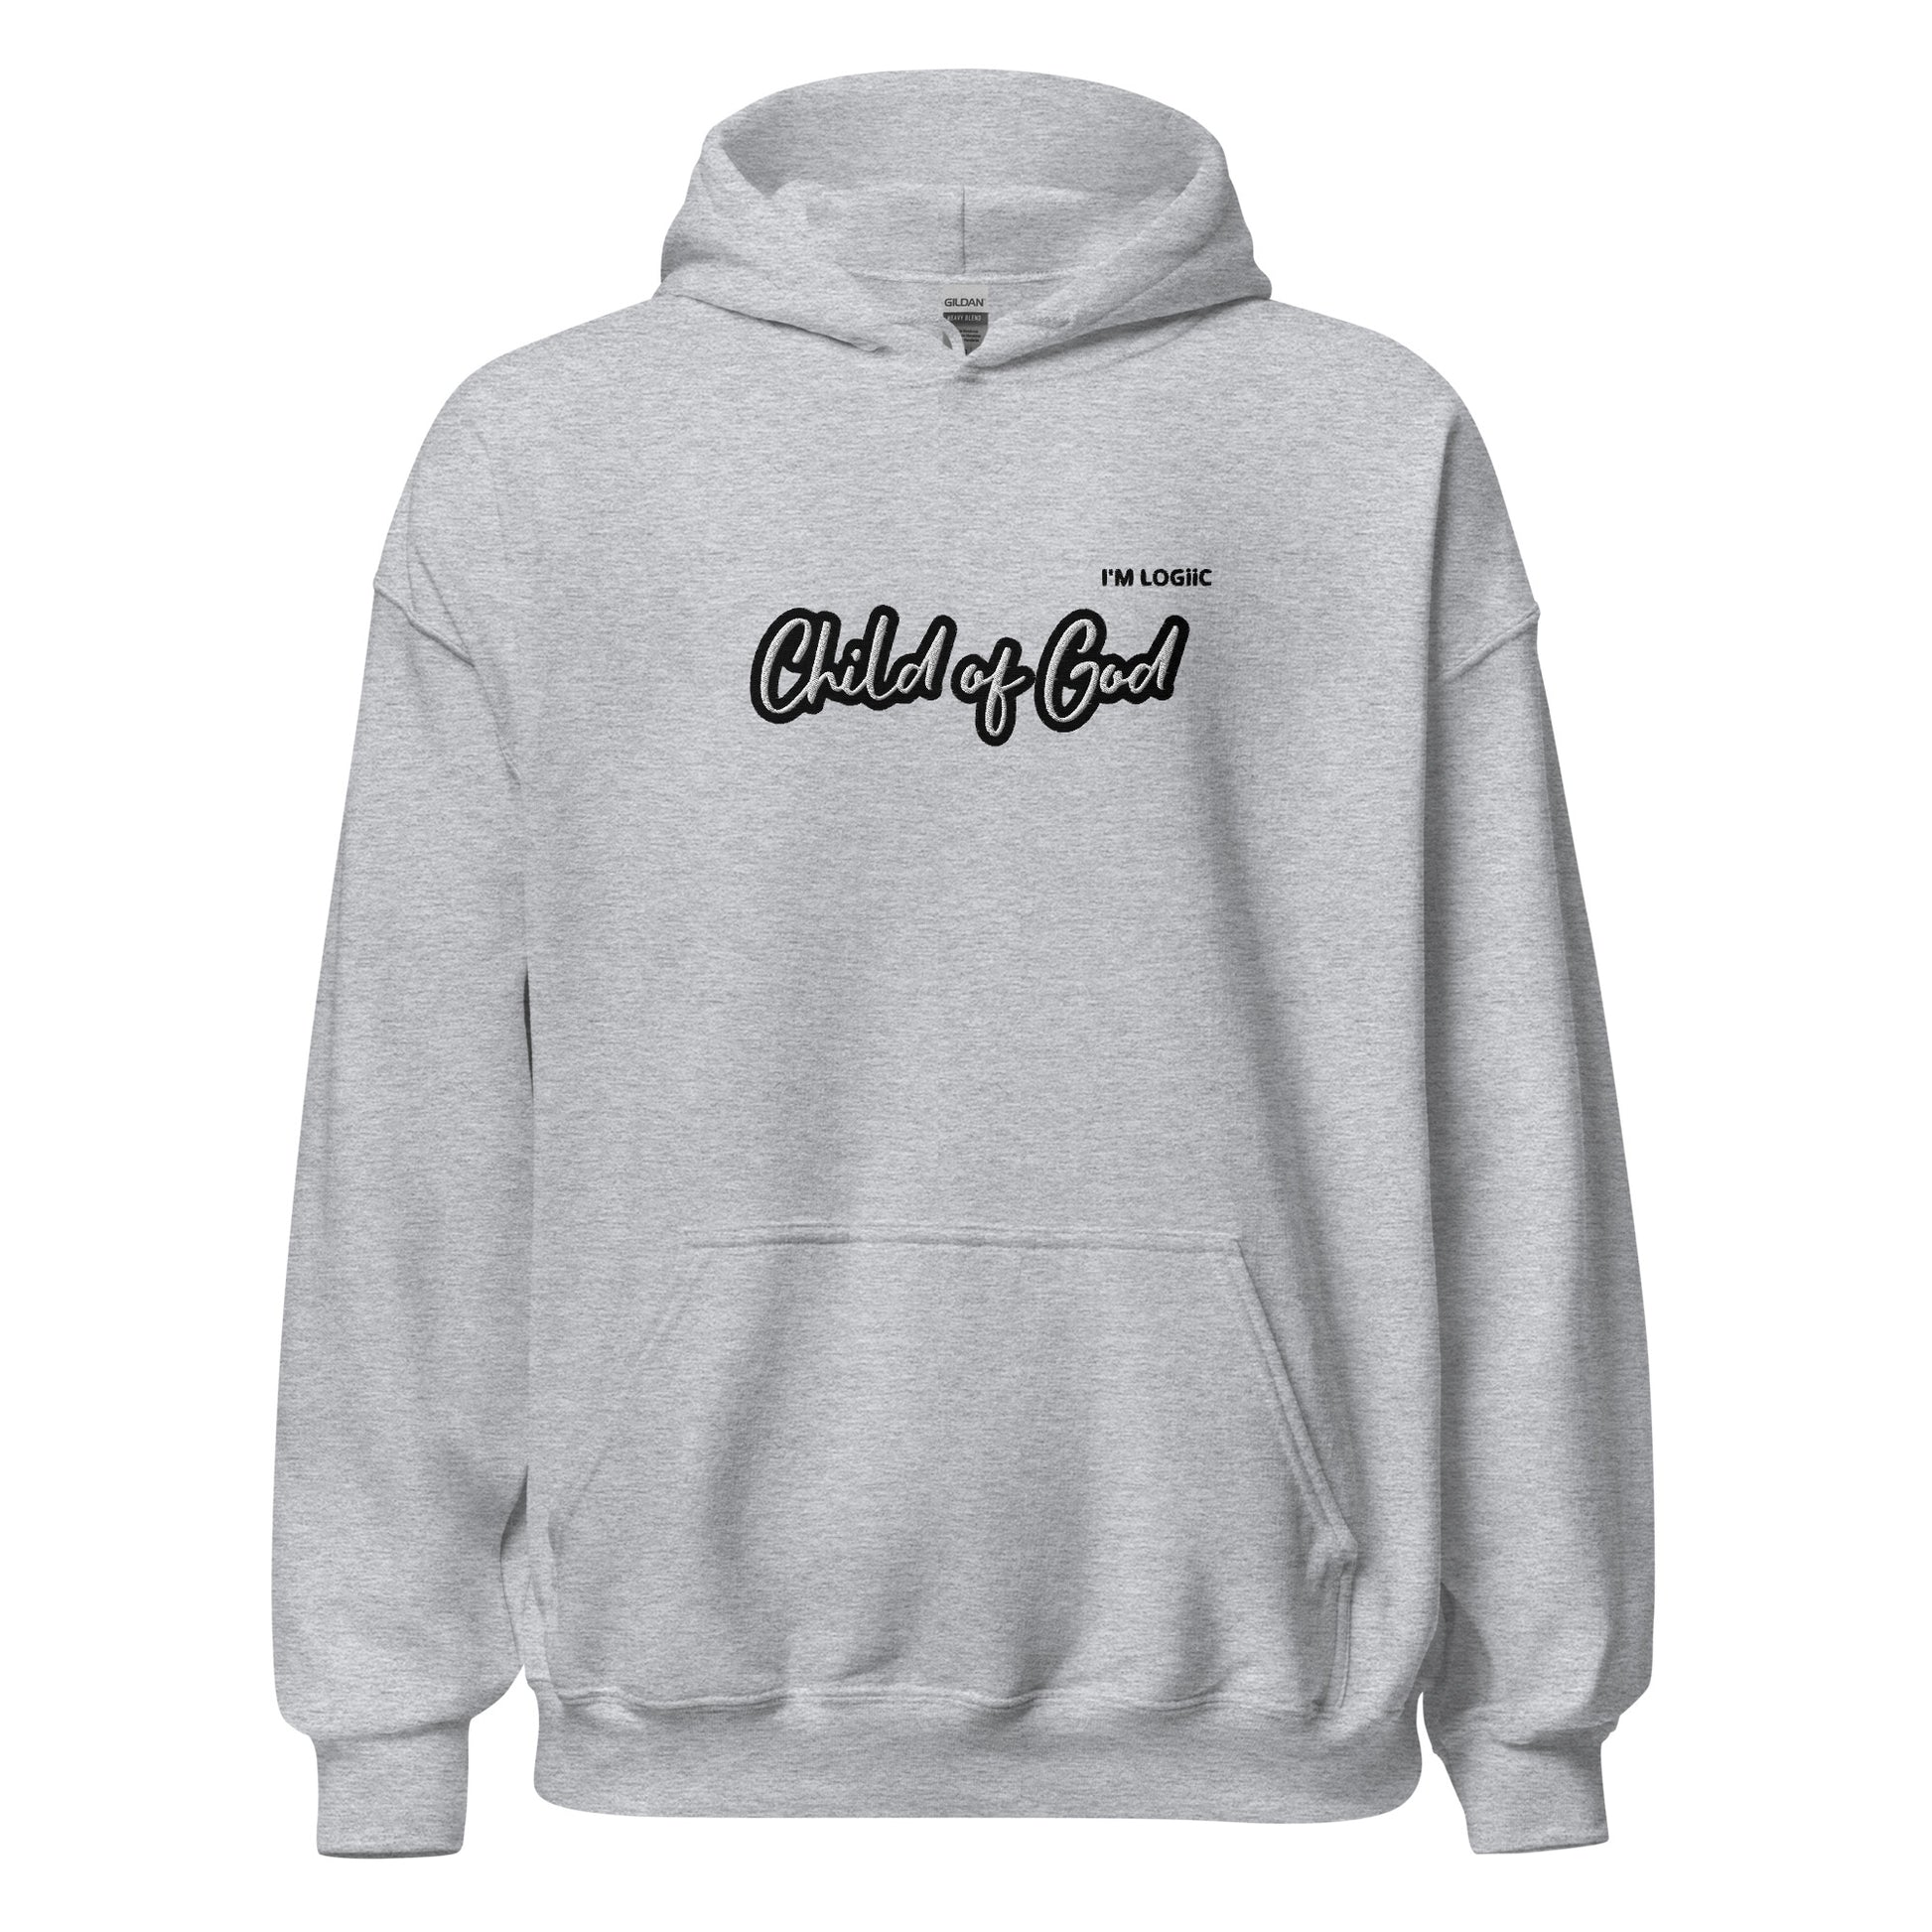 Child of God Hoodie - Sport Grey / S - Shirts & Tops